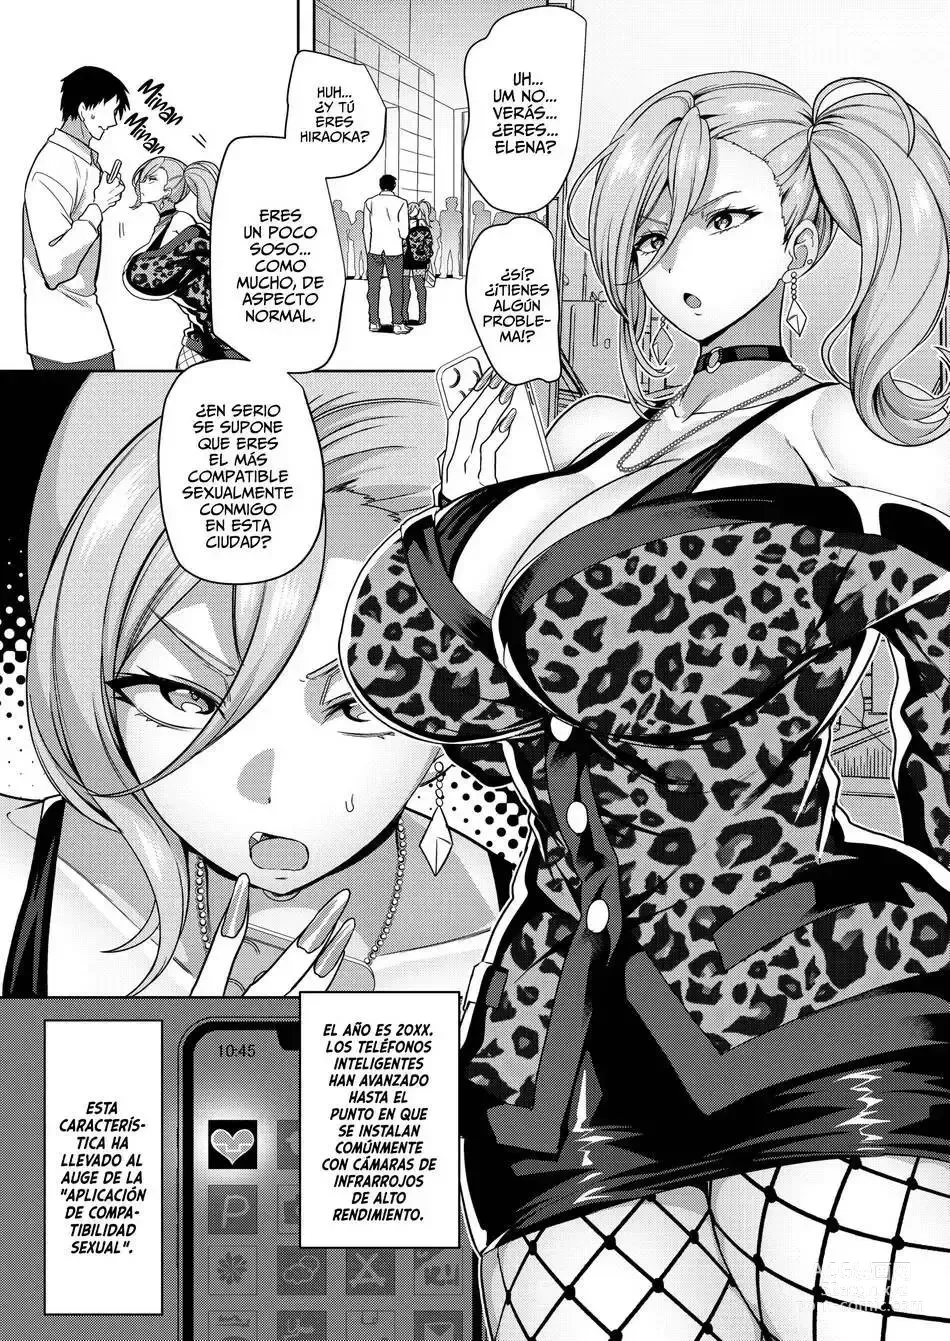 Page 2 of doujinshi Sexual Application to Attract Whores 1-2